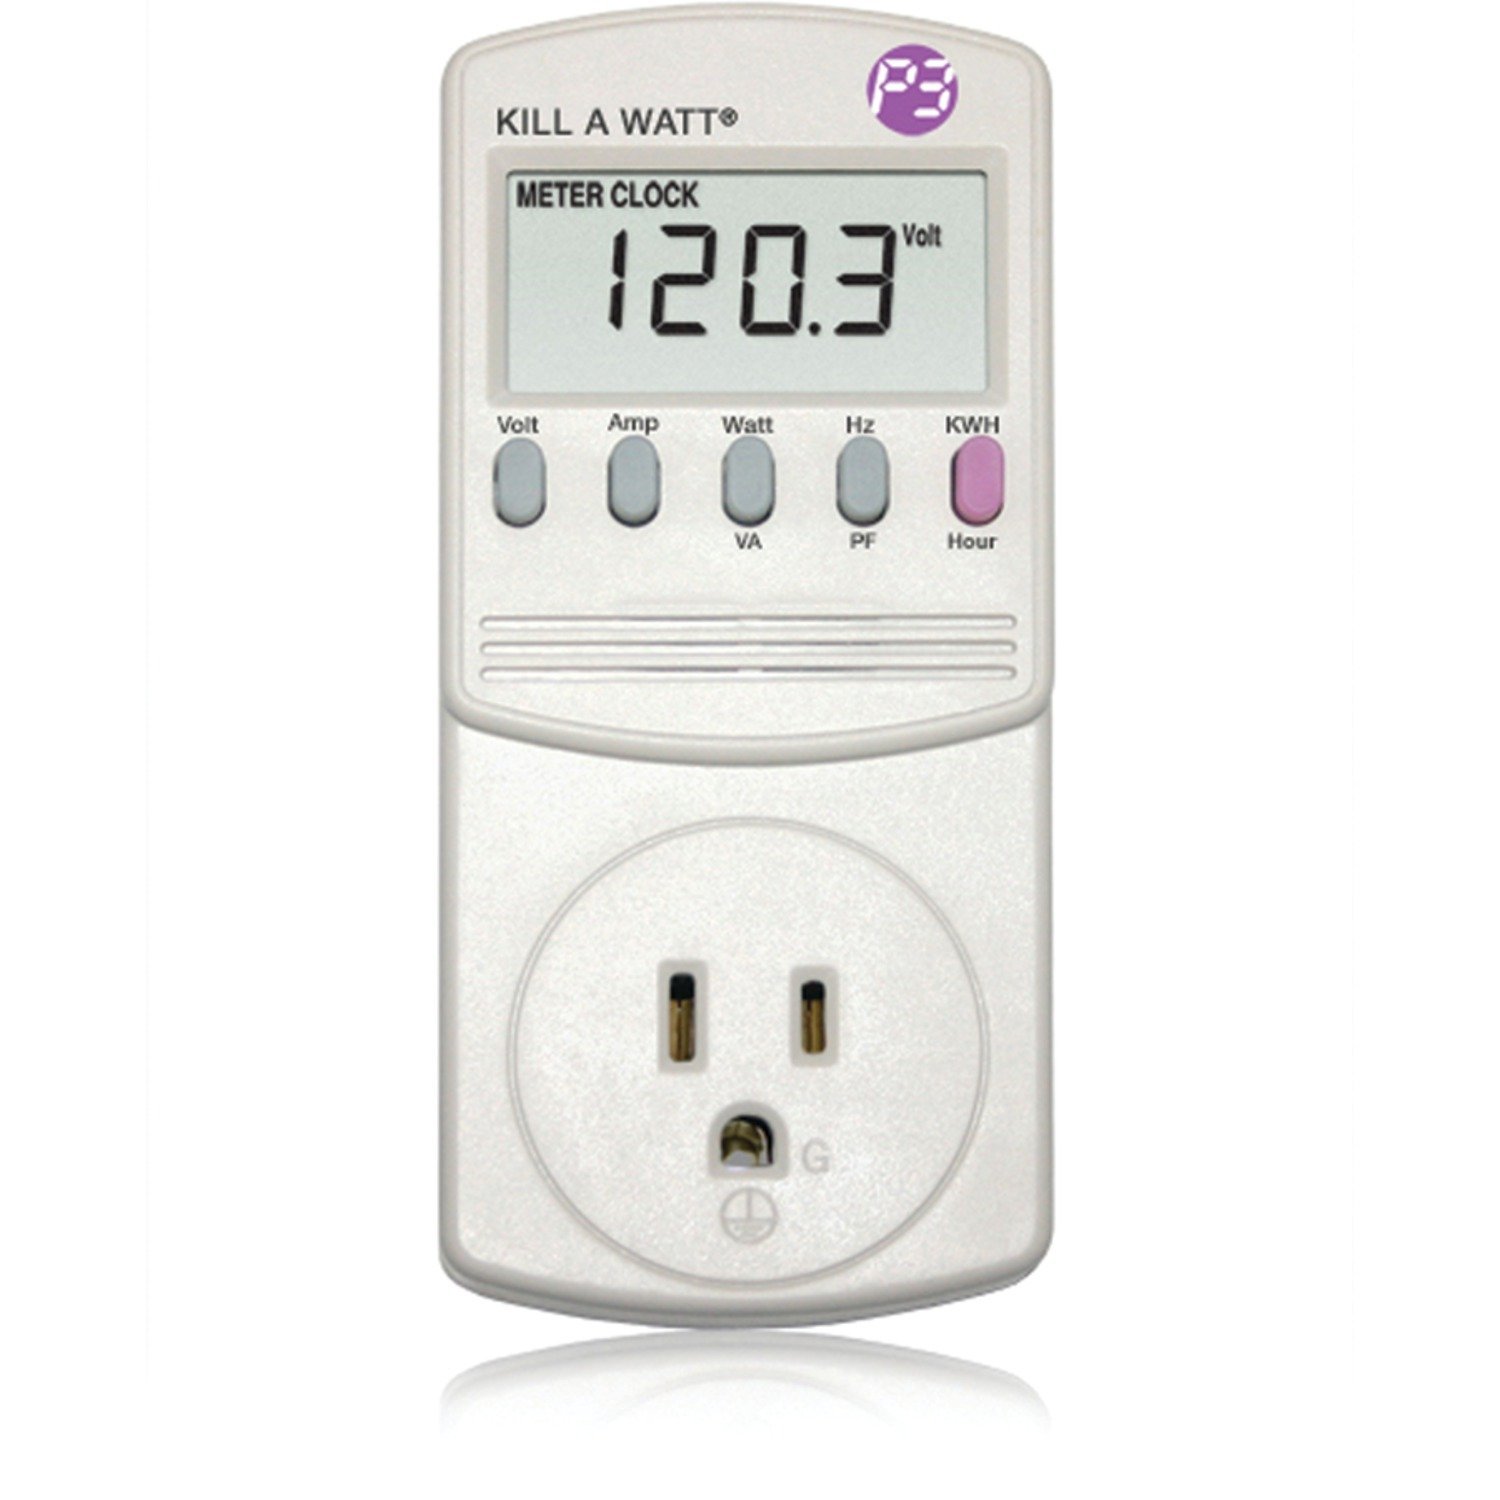 10 Best Electricity Usage Monitors 9 